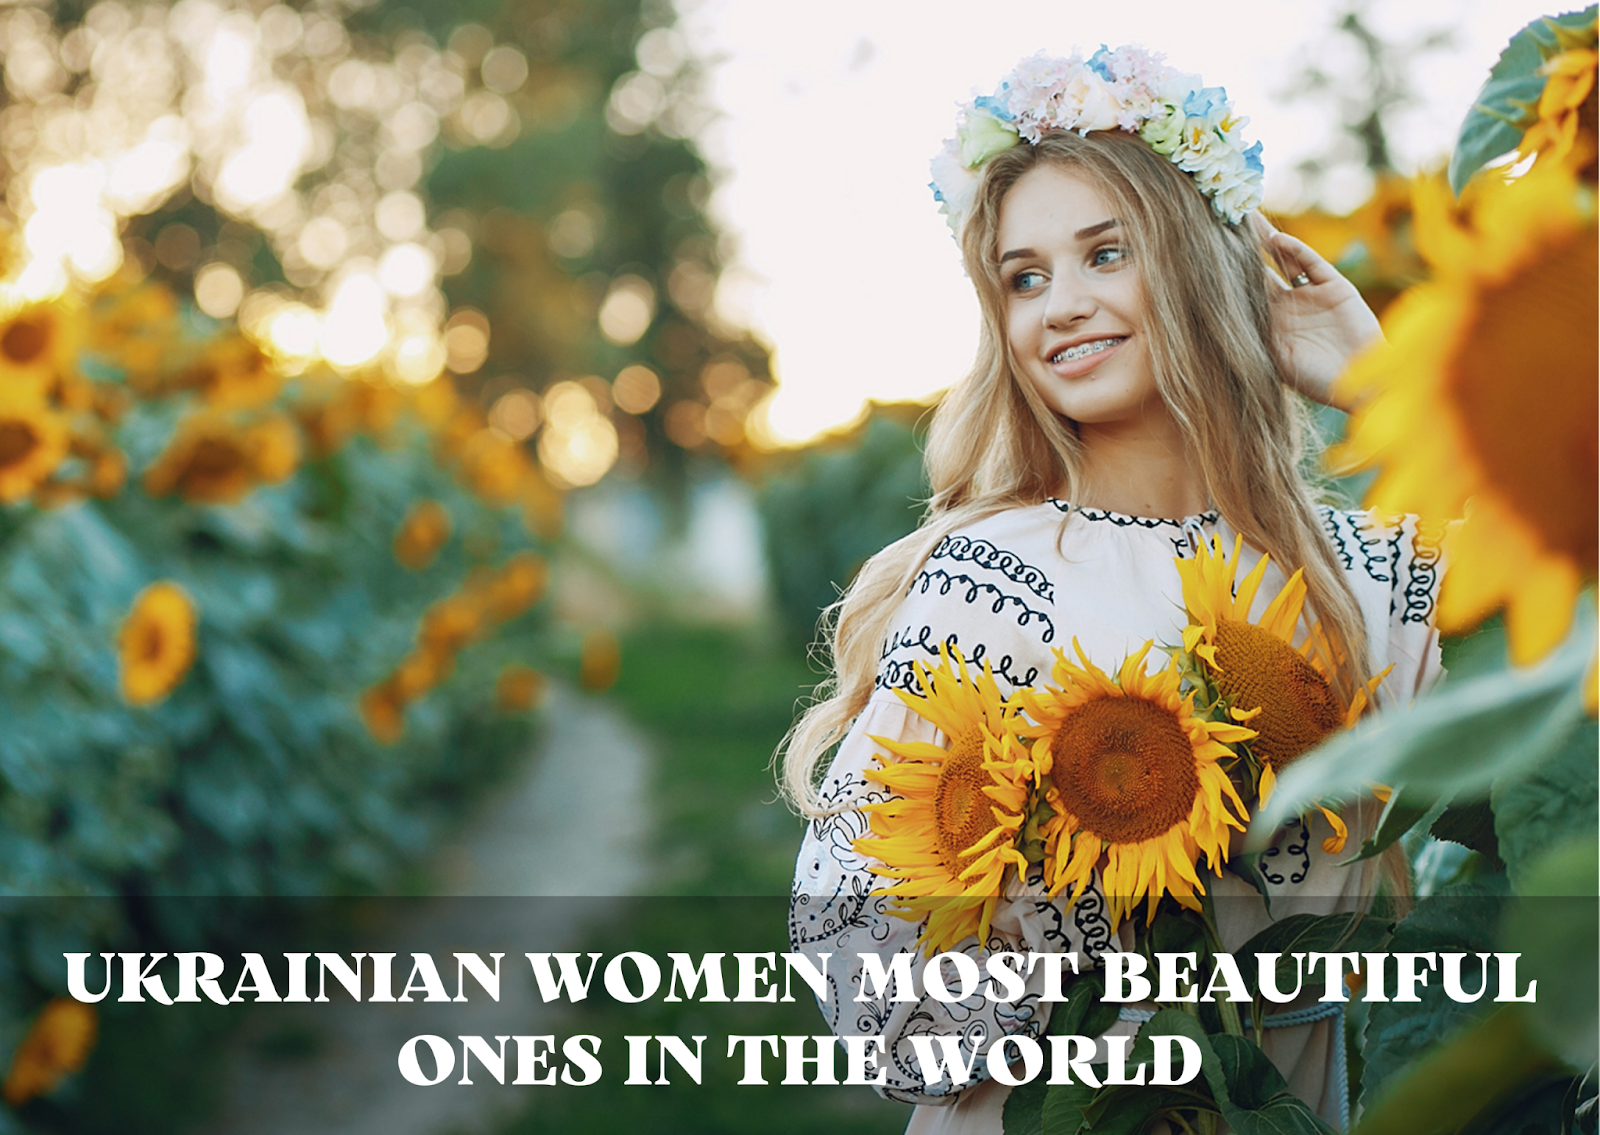 Why Are Ukrainian Women Most Beautiful Ones In The World? A Detailed Investigation